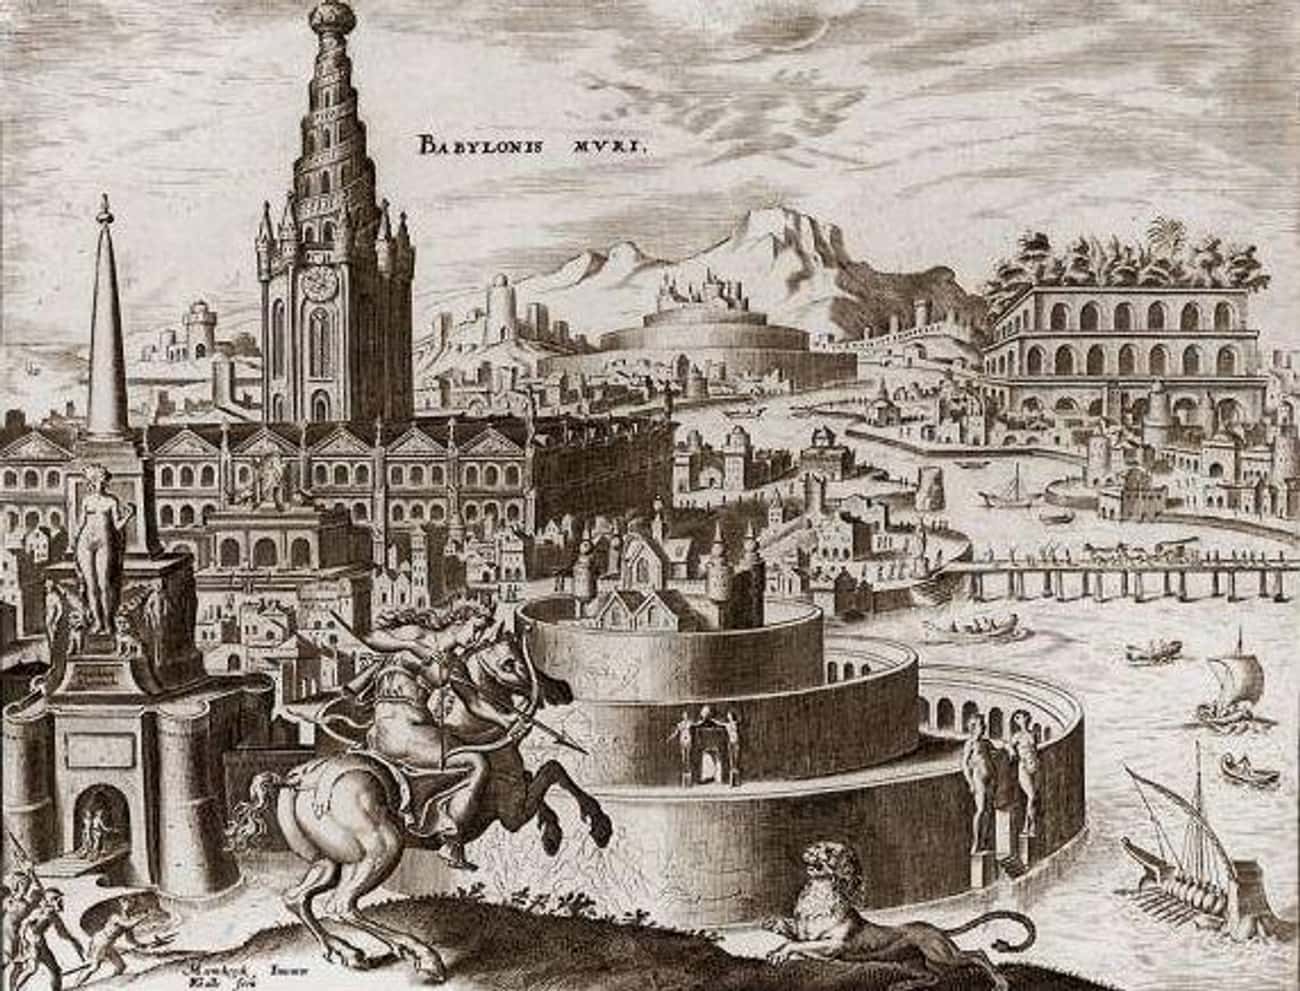 Babylon Was Home To One Of The Earliest Written Legal Codes